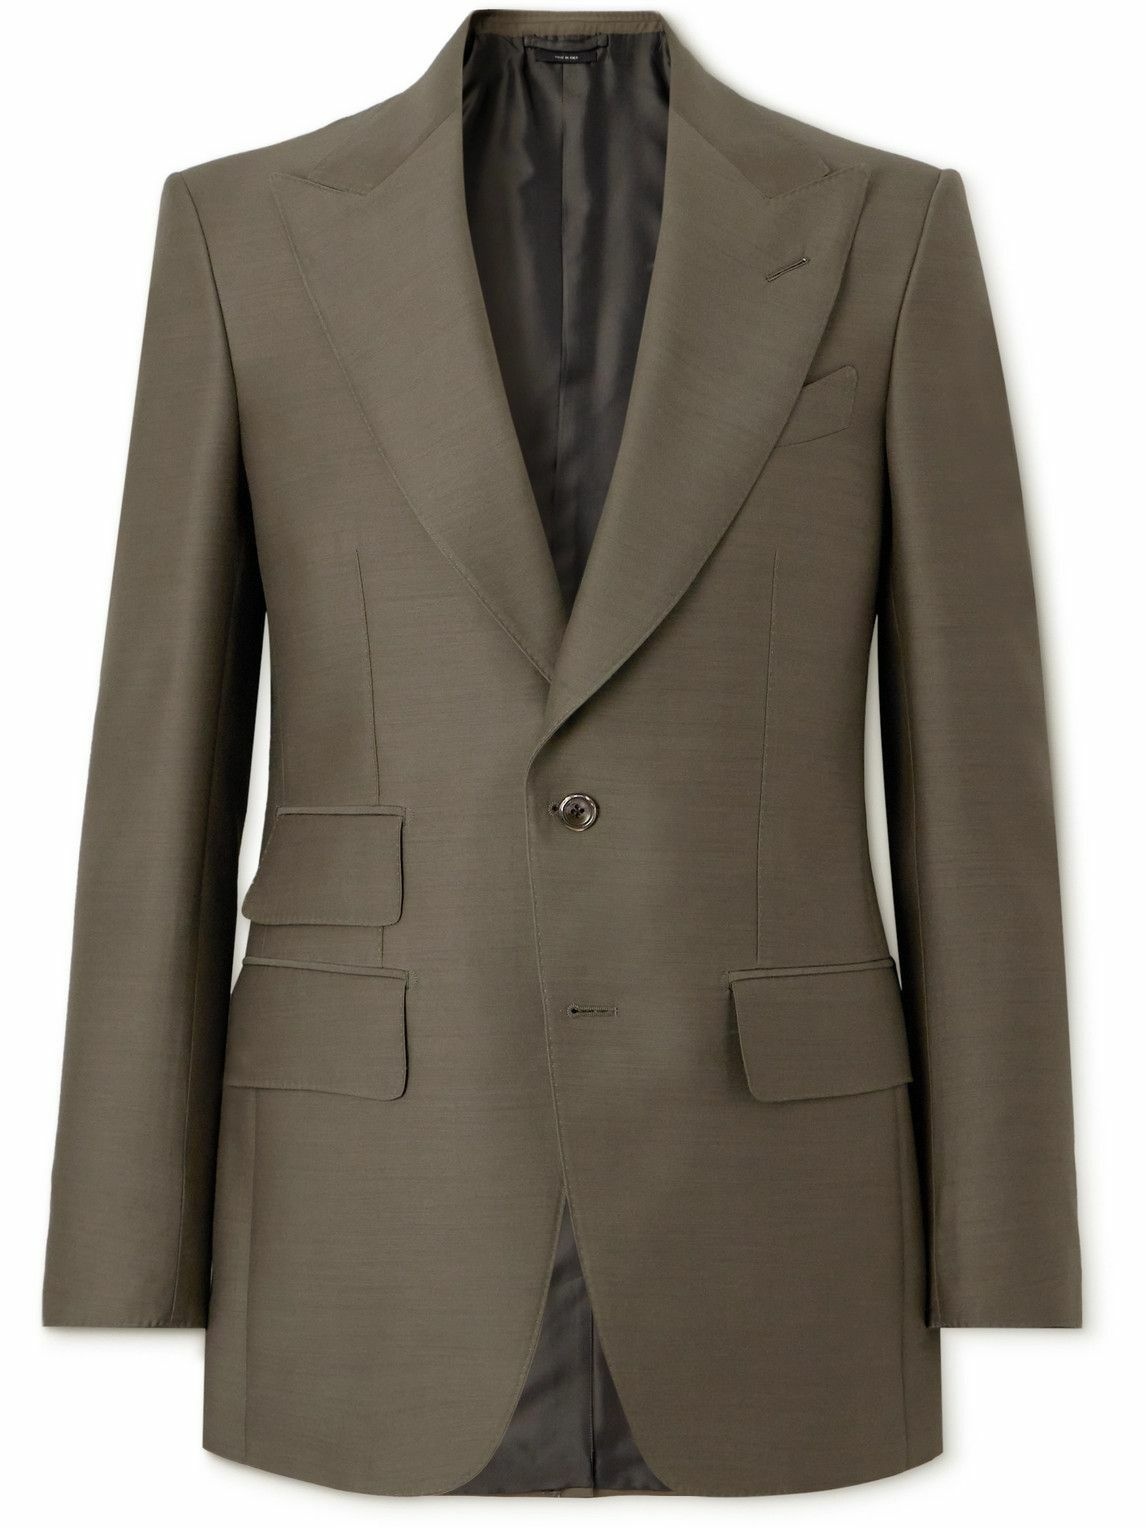 TOM FORD - Wool and Silk-Blend Suit Jacket - Green TOM FORD